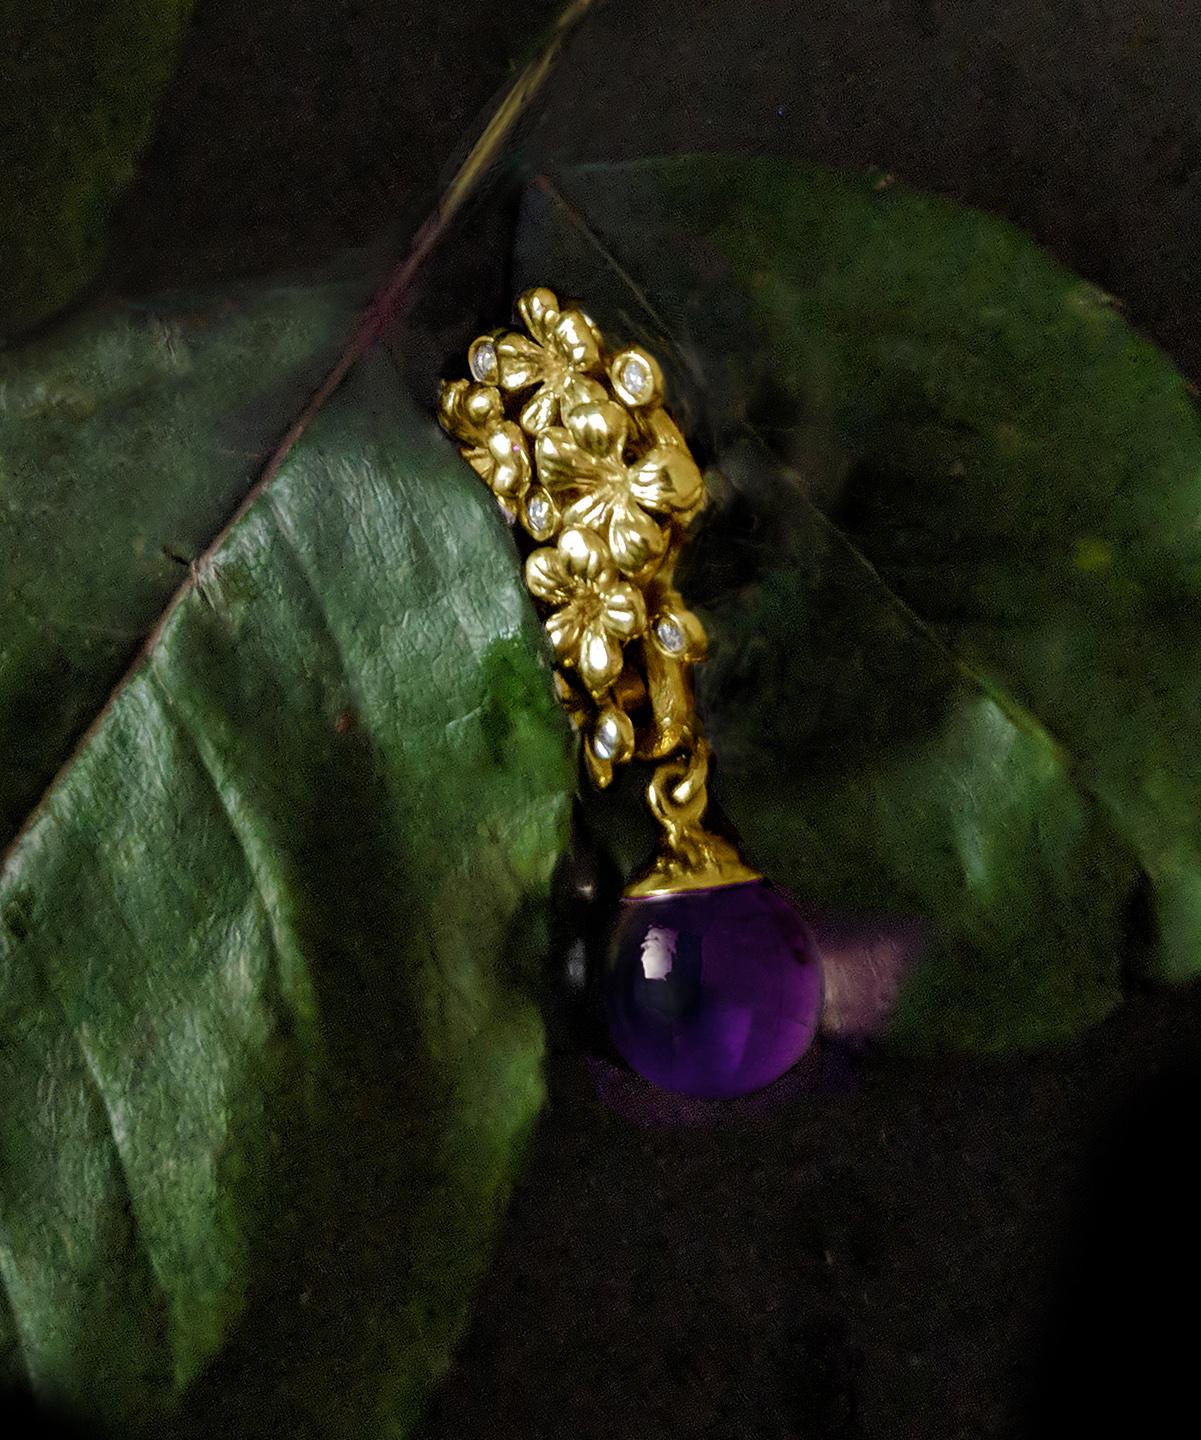 This Plum Blossom necklace pendant is a unique sculptural piece made from 14 karat yellow gold, encrusted with 5 round diamonds and a removable cabochon amethyst drop. We use top natural diamonds, VS clarity and F-G color, and work with a German